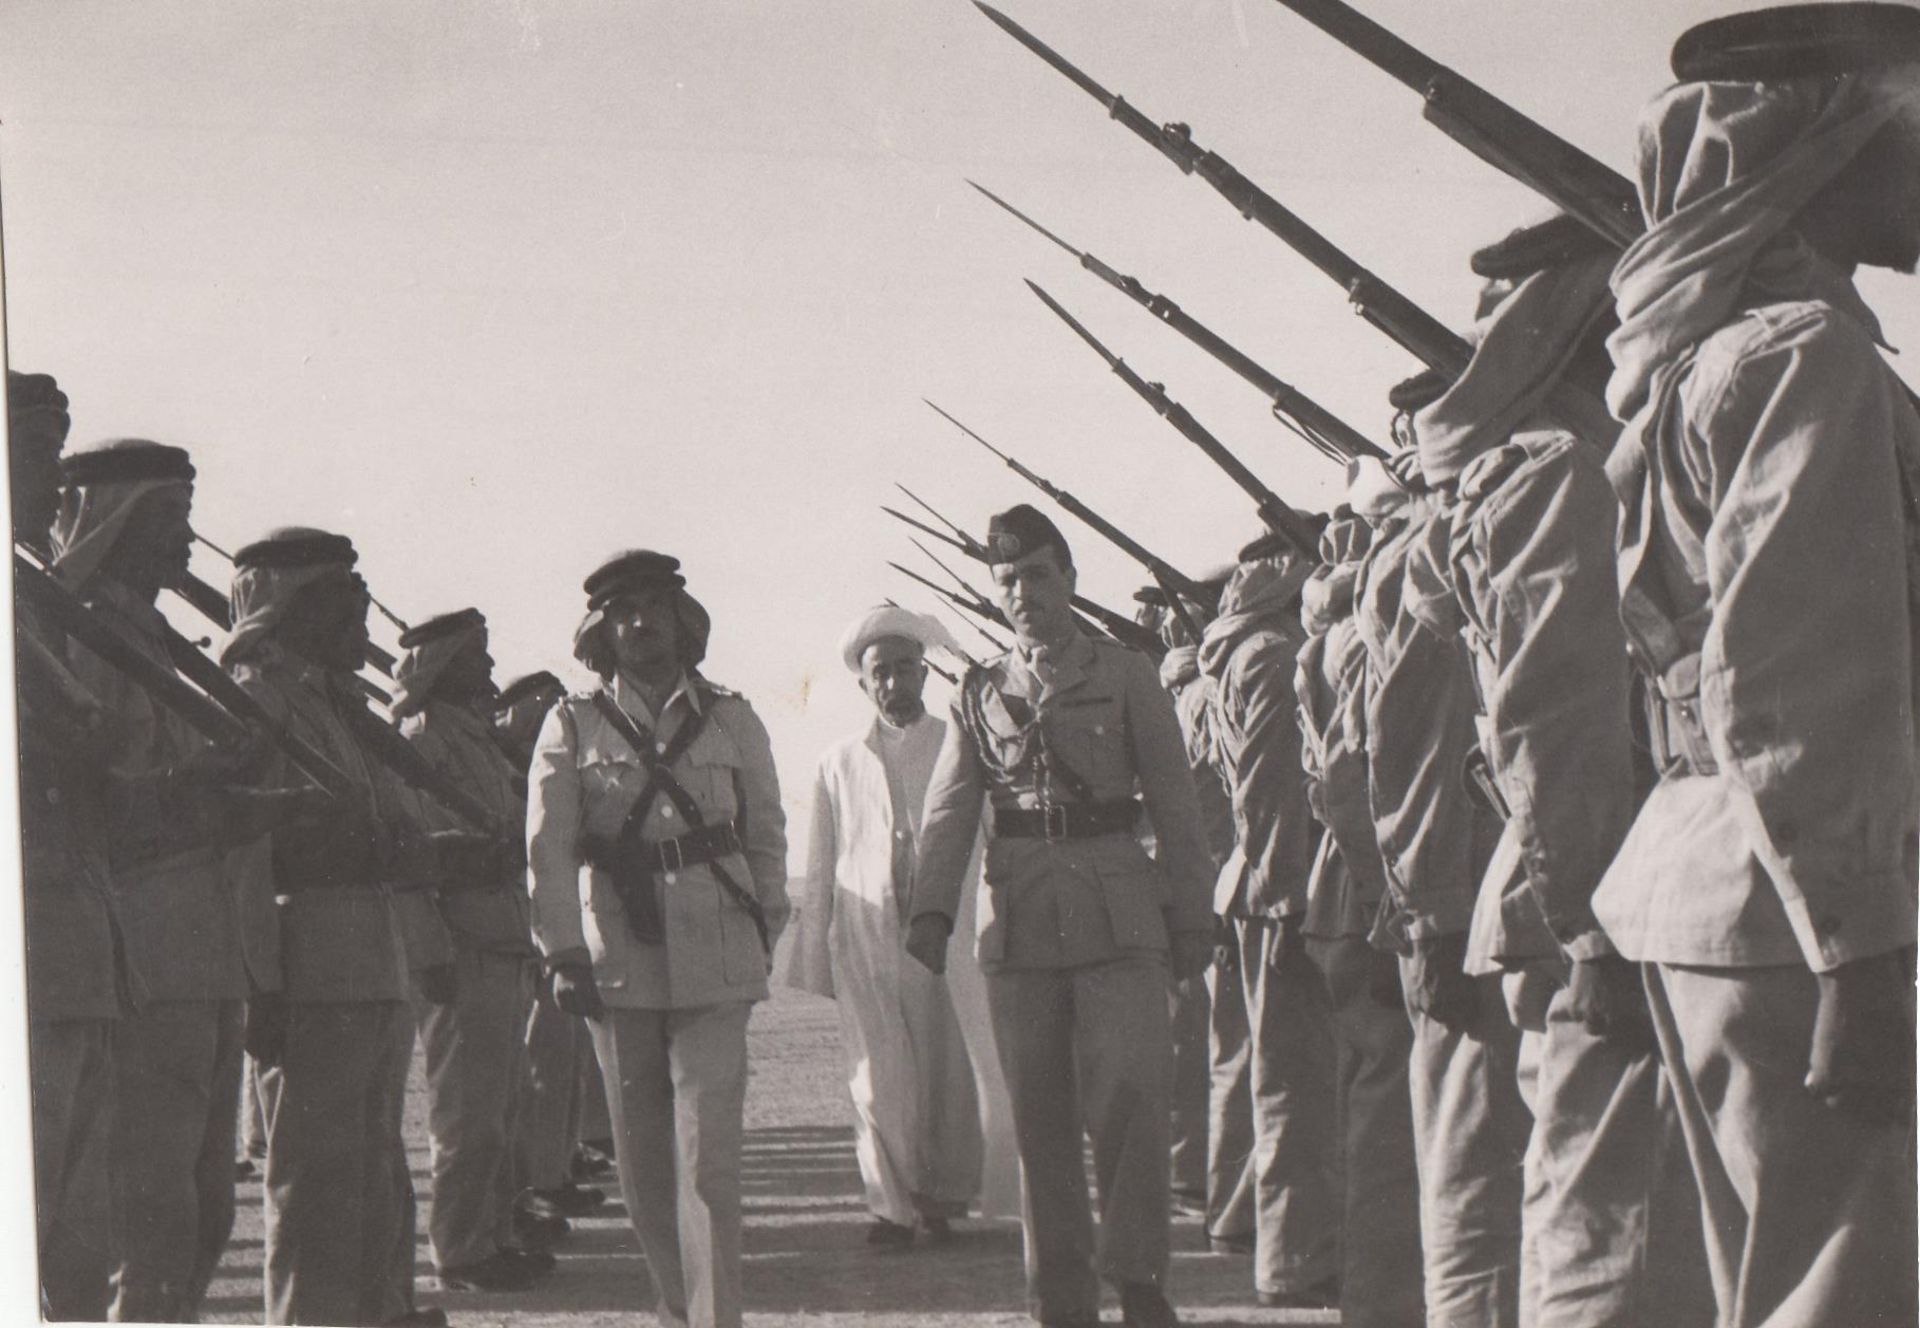 FIVE IMPORTANT PHOTOGRAPHS OF THE HISTORICAL VISIT OF KING ABDULLAH BIN AL-HUSSEIN TO SAUDI ARABIA M - Image 3 of 7